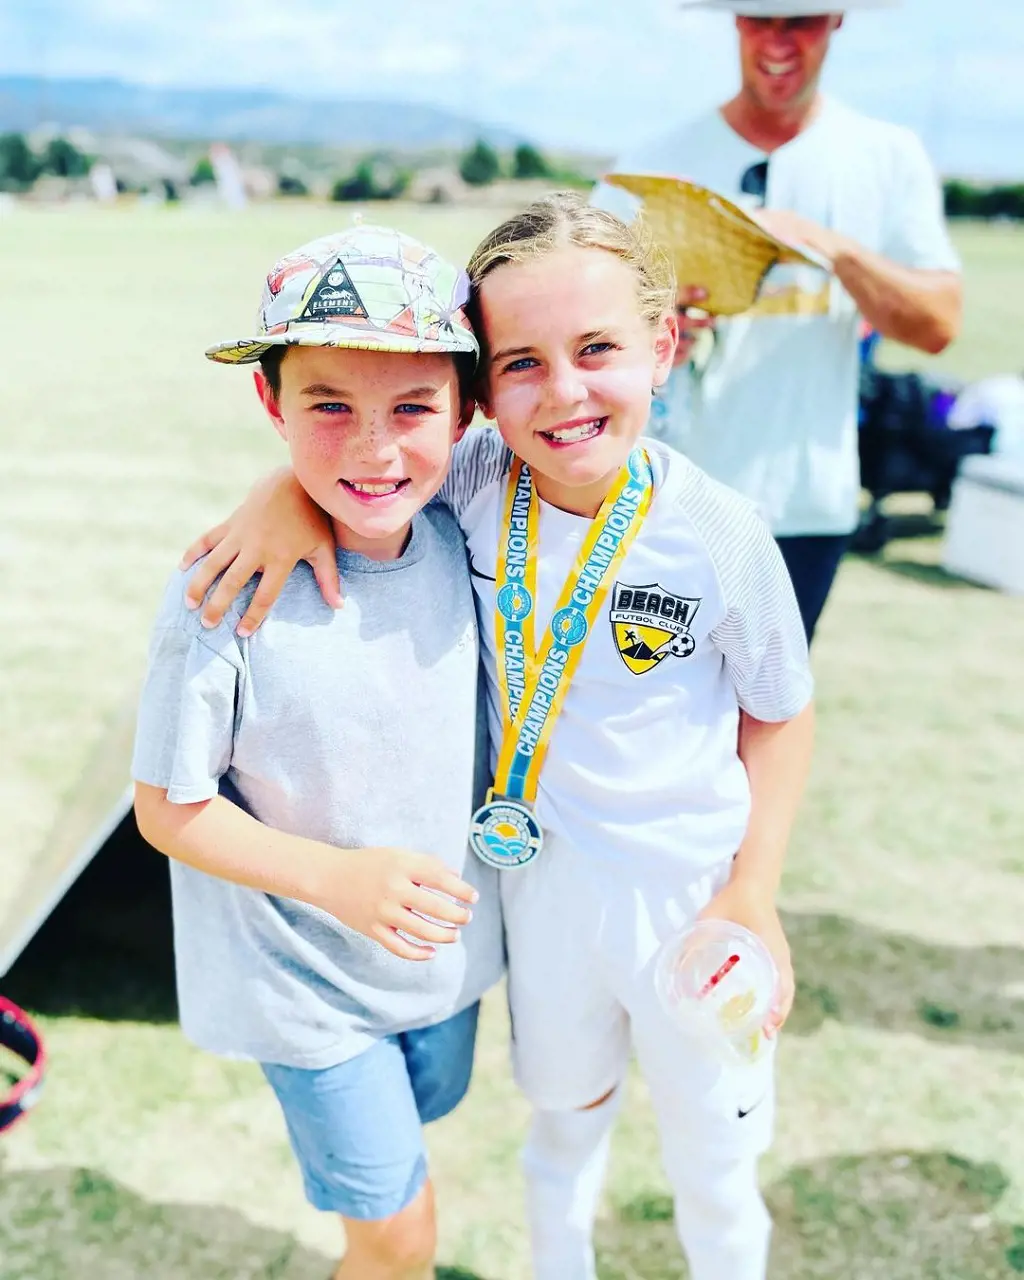 Mitch his son and daughter during their sport day in school